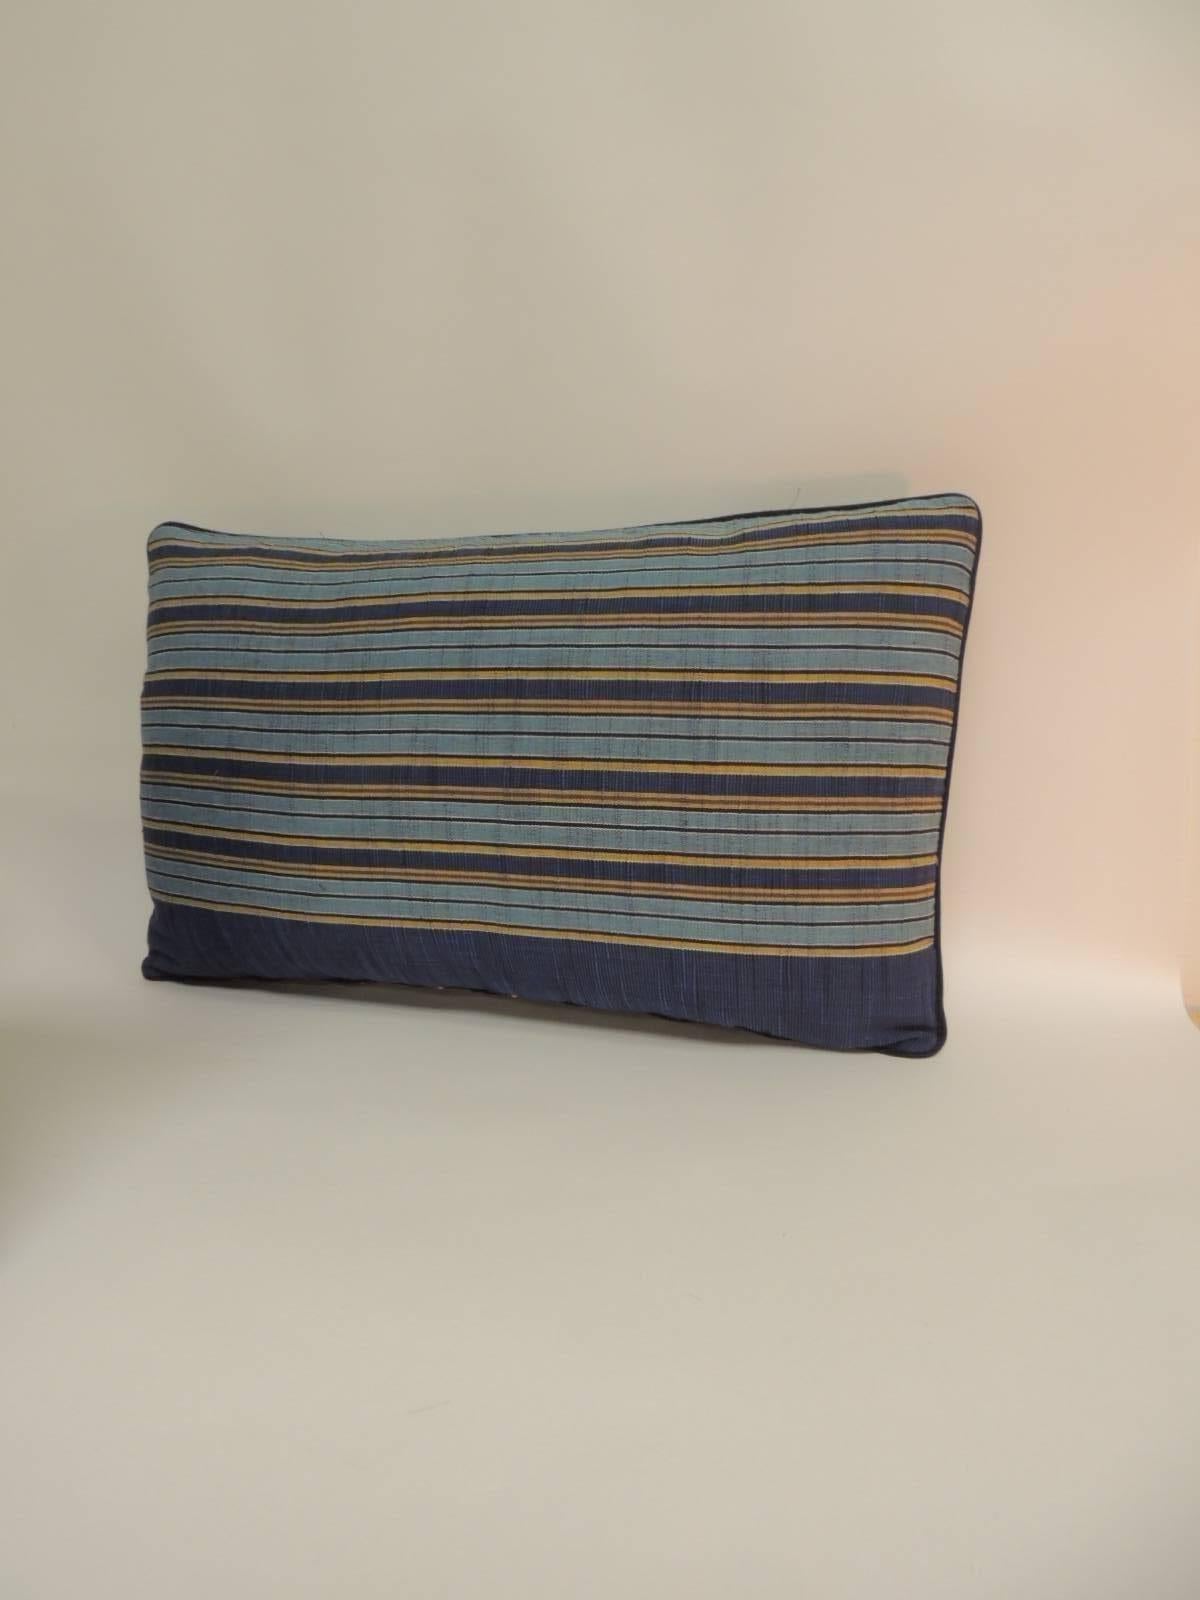 Pair of vintage Japanese blue and gold obi stripes decorative lumbar pillows. The textiles in these decorative pillows are woven silk. Throw pillows embellished with a small decorative black trim all around. Decorative pillows finished with deep